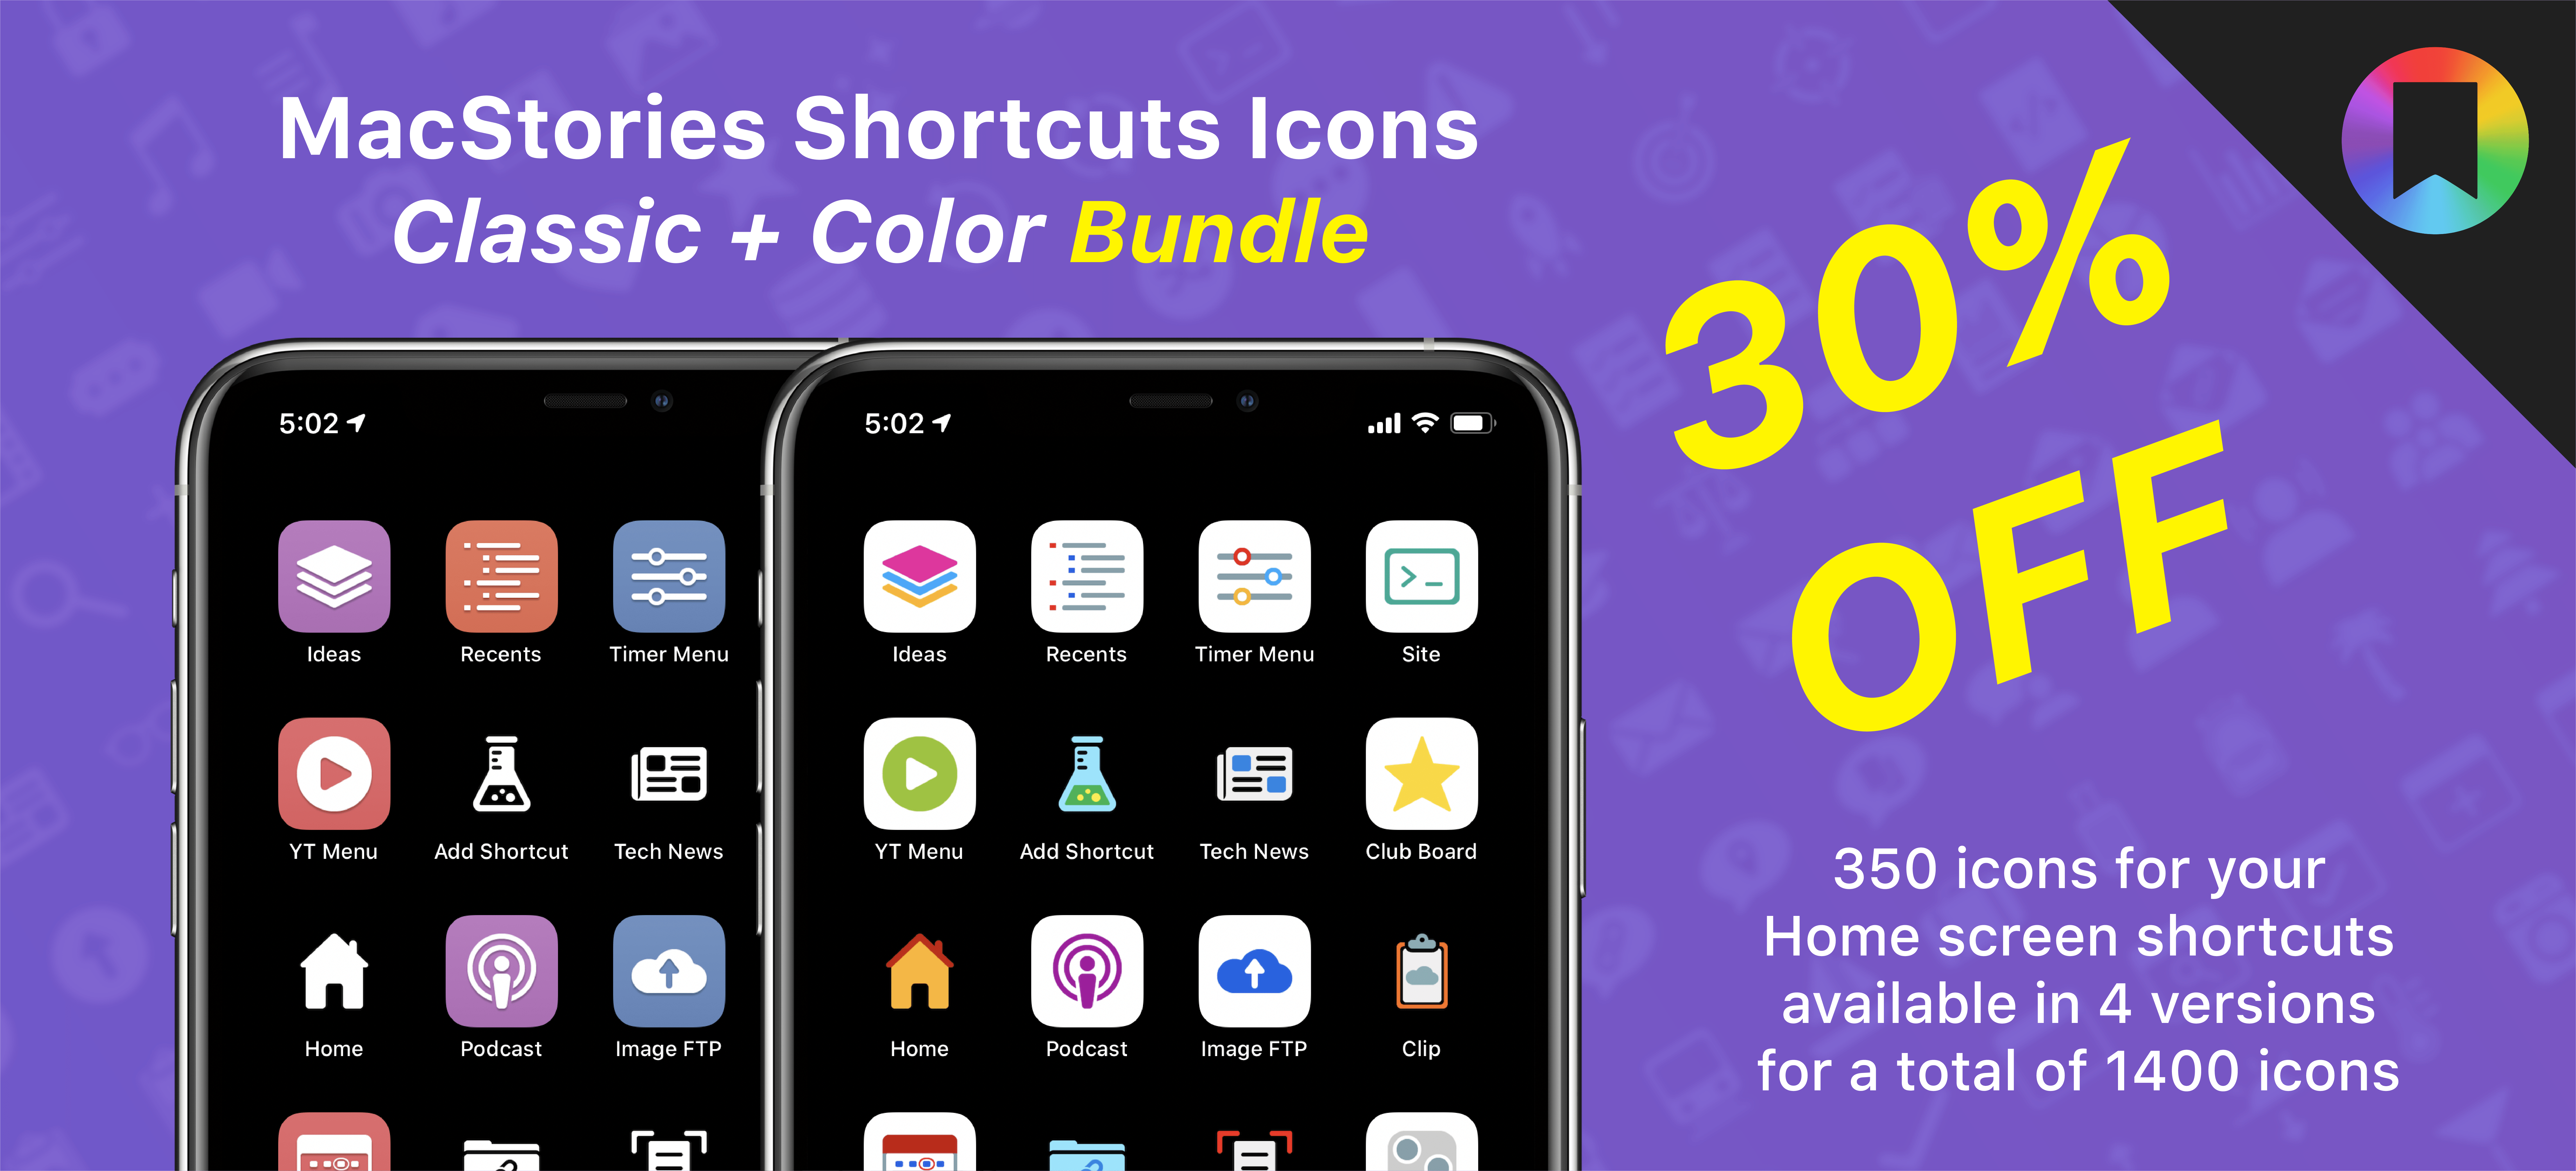 The Bundle edition of MacStories Shortcuts Icons contains both the Classic and Color sets.